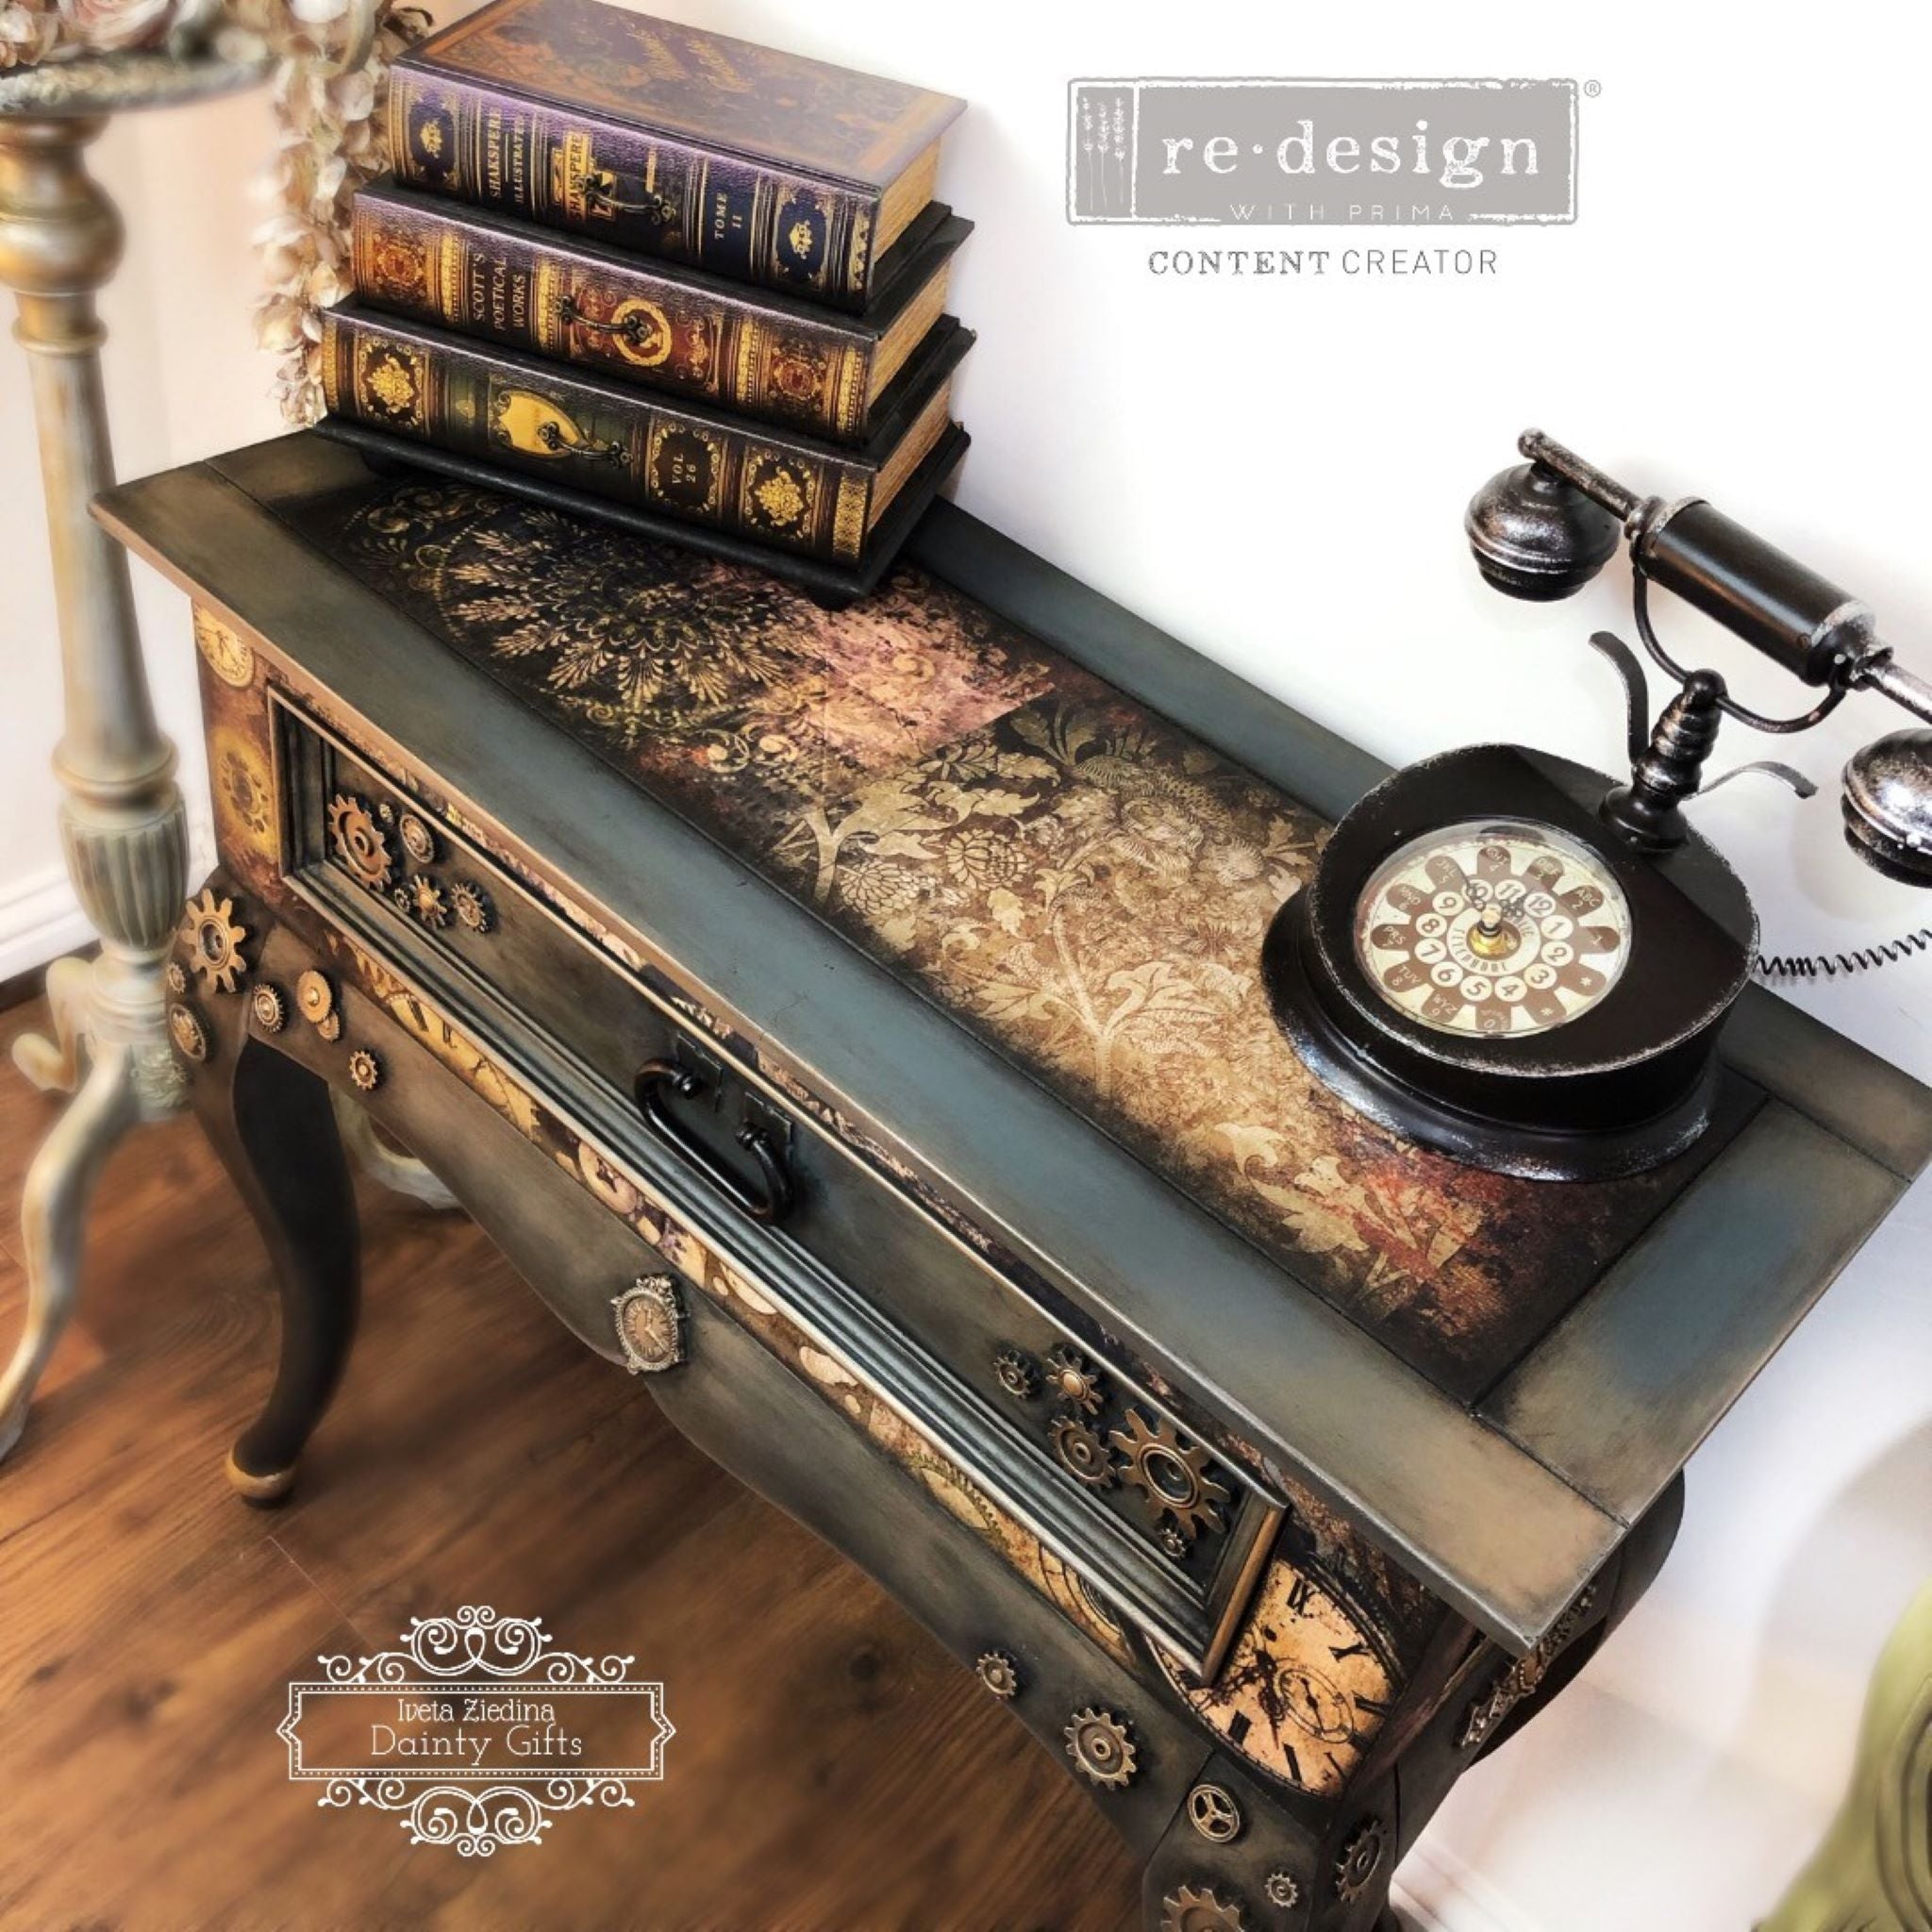 A vintage side table refurbished by Iveta Ziedina Dainty Gifts is painted in a steampunk style and features ReDesign with Prima's Gothic Rhapsody tissue paper on the top.